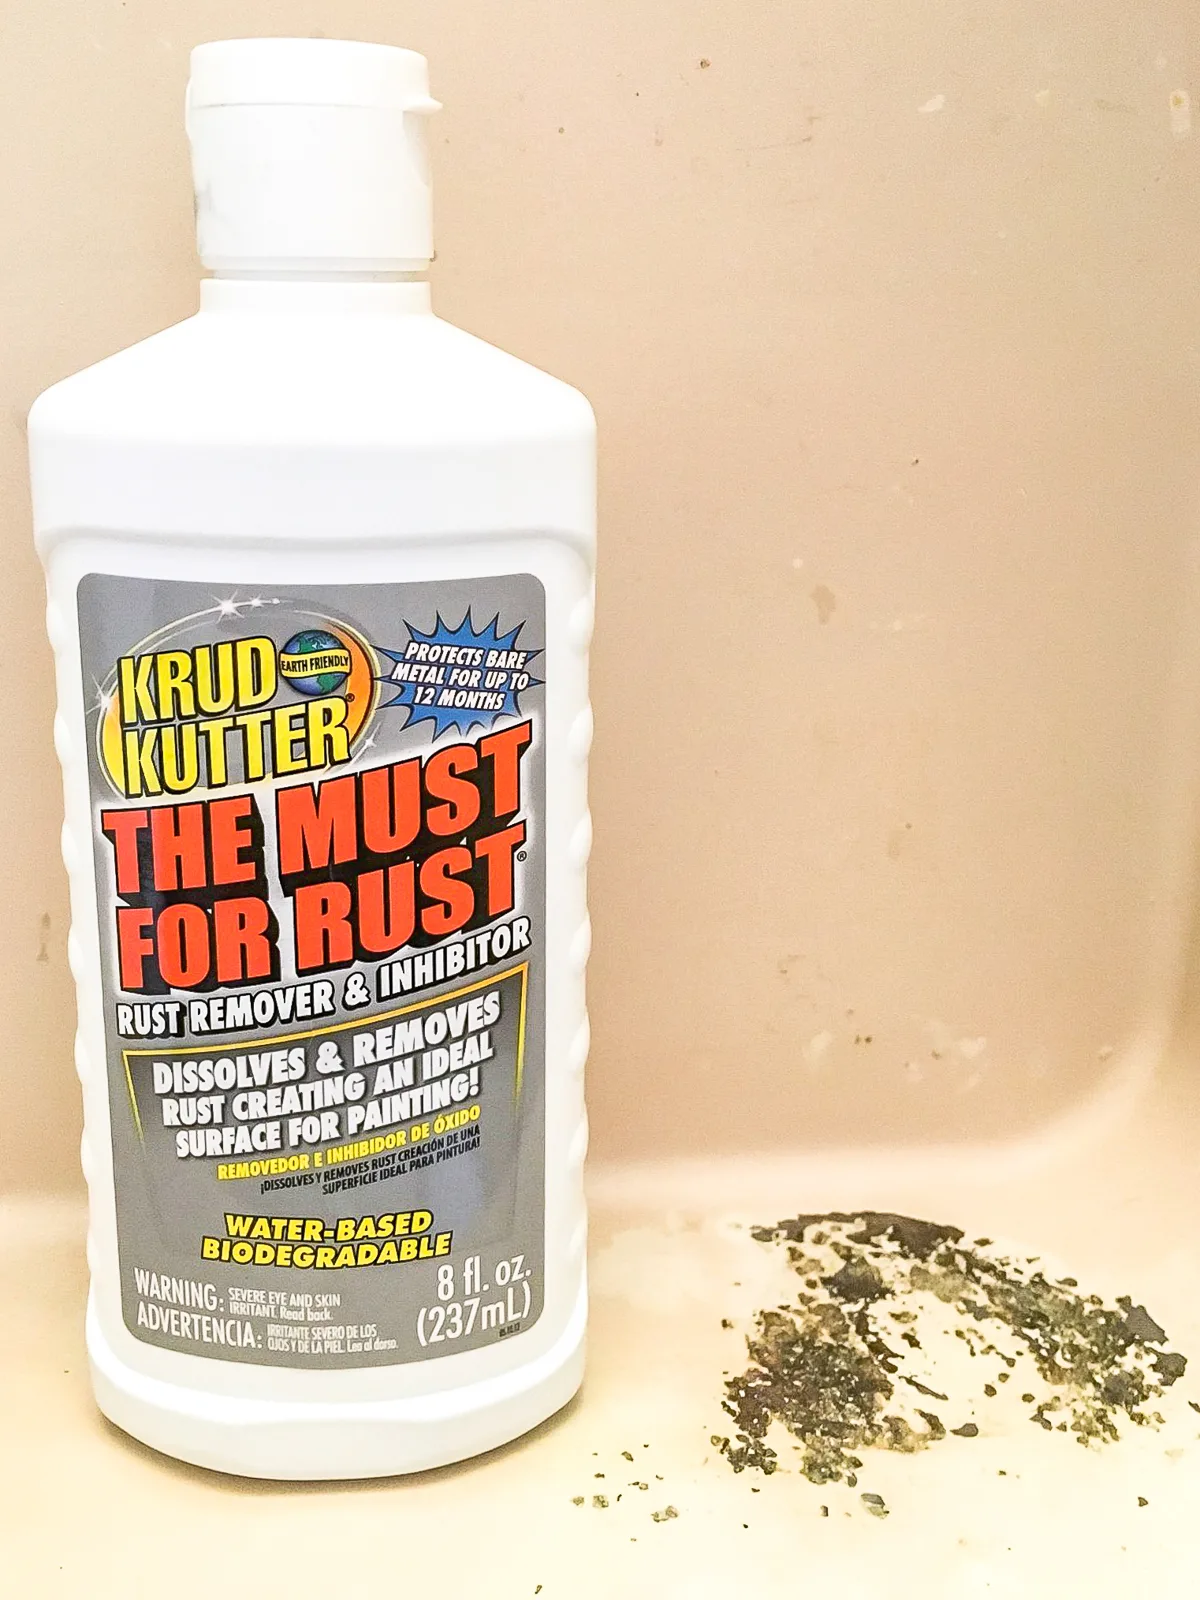 Krud Kutter rust remover and inhibitor on rusted metal surface